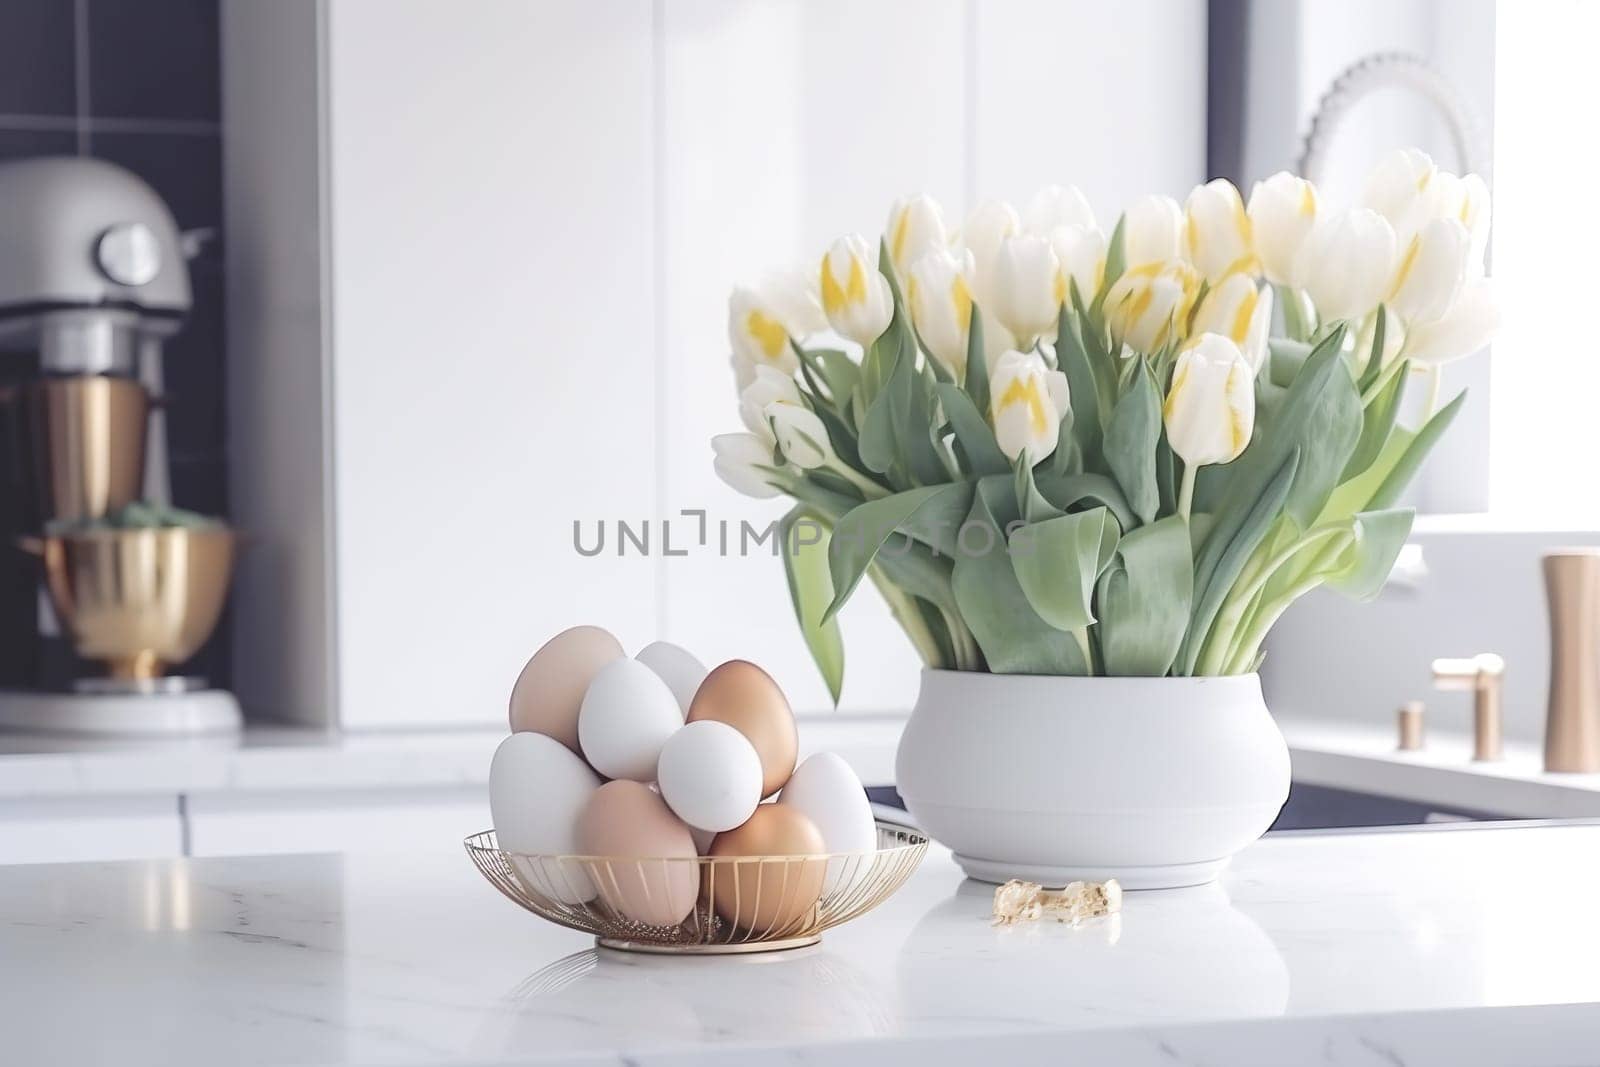 Easter table setting with tulips, Easter bunnies, and eggs with golden patterns in the white Scandinavian-style kitchen background. Beautiful minimalist design for greeting card.